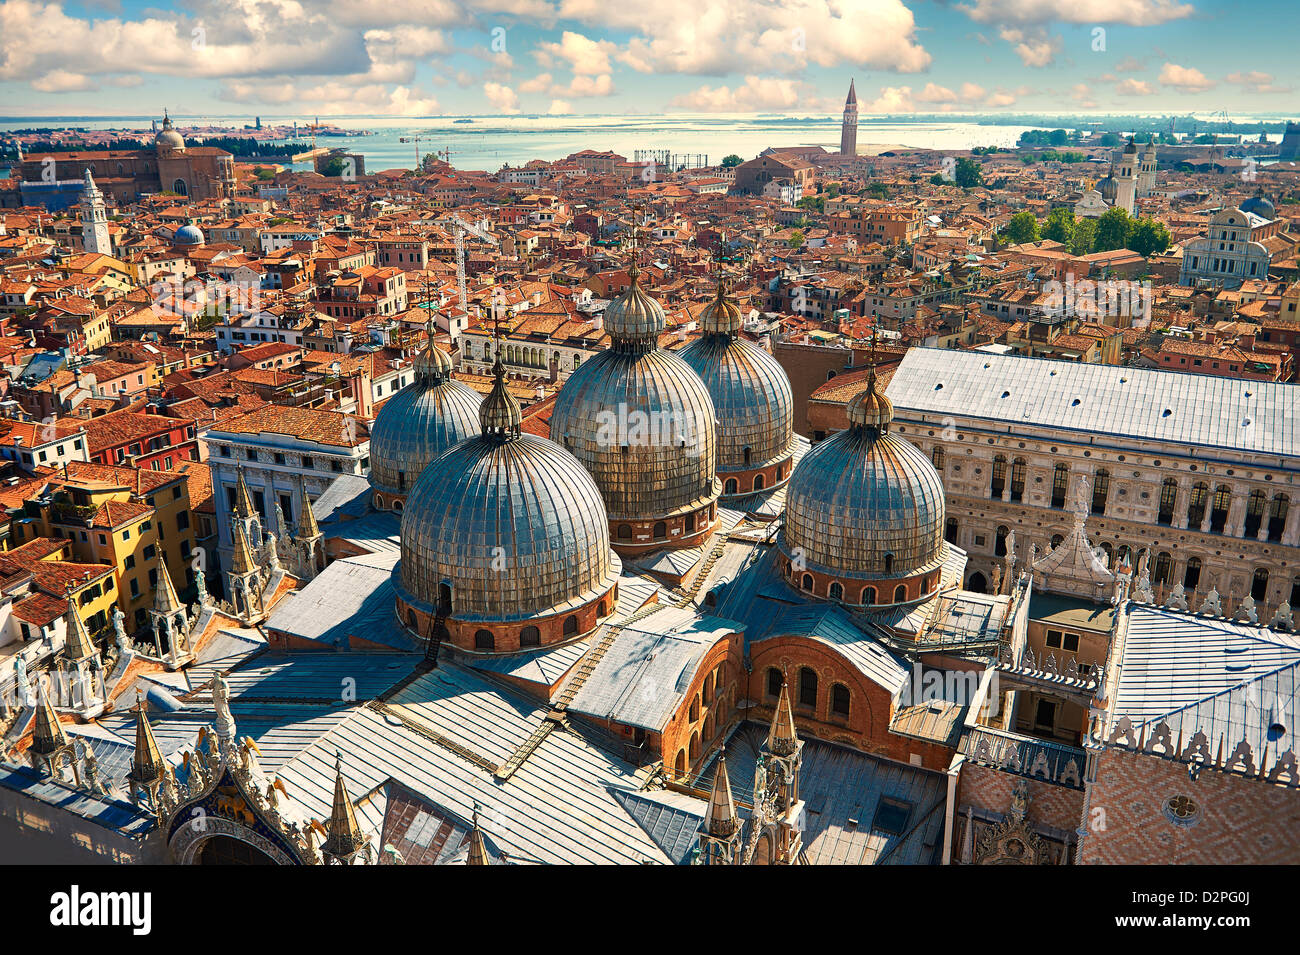 Arial view of St Mark's Basilica & Doges Palace, Venice Italy Stock Photo